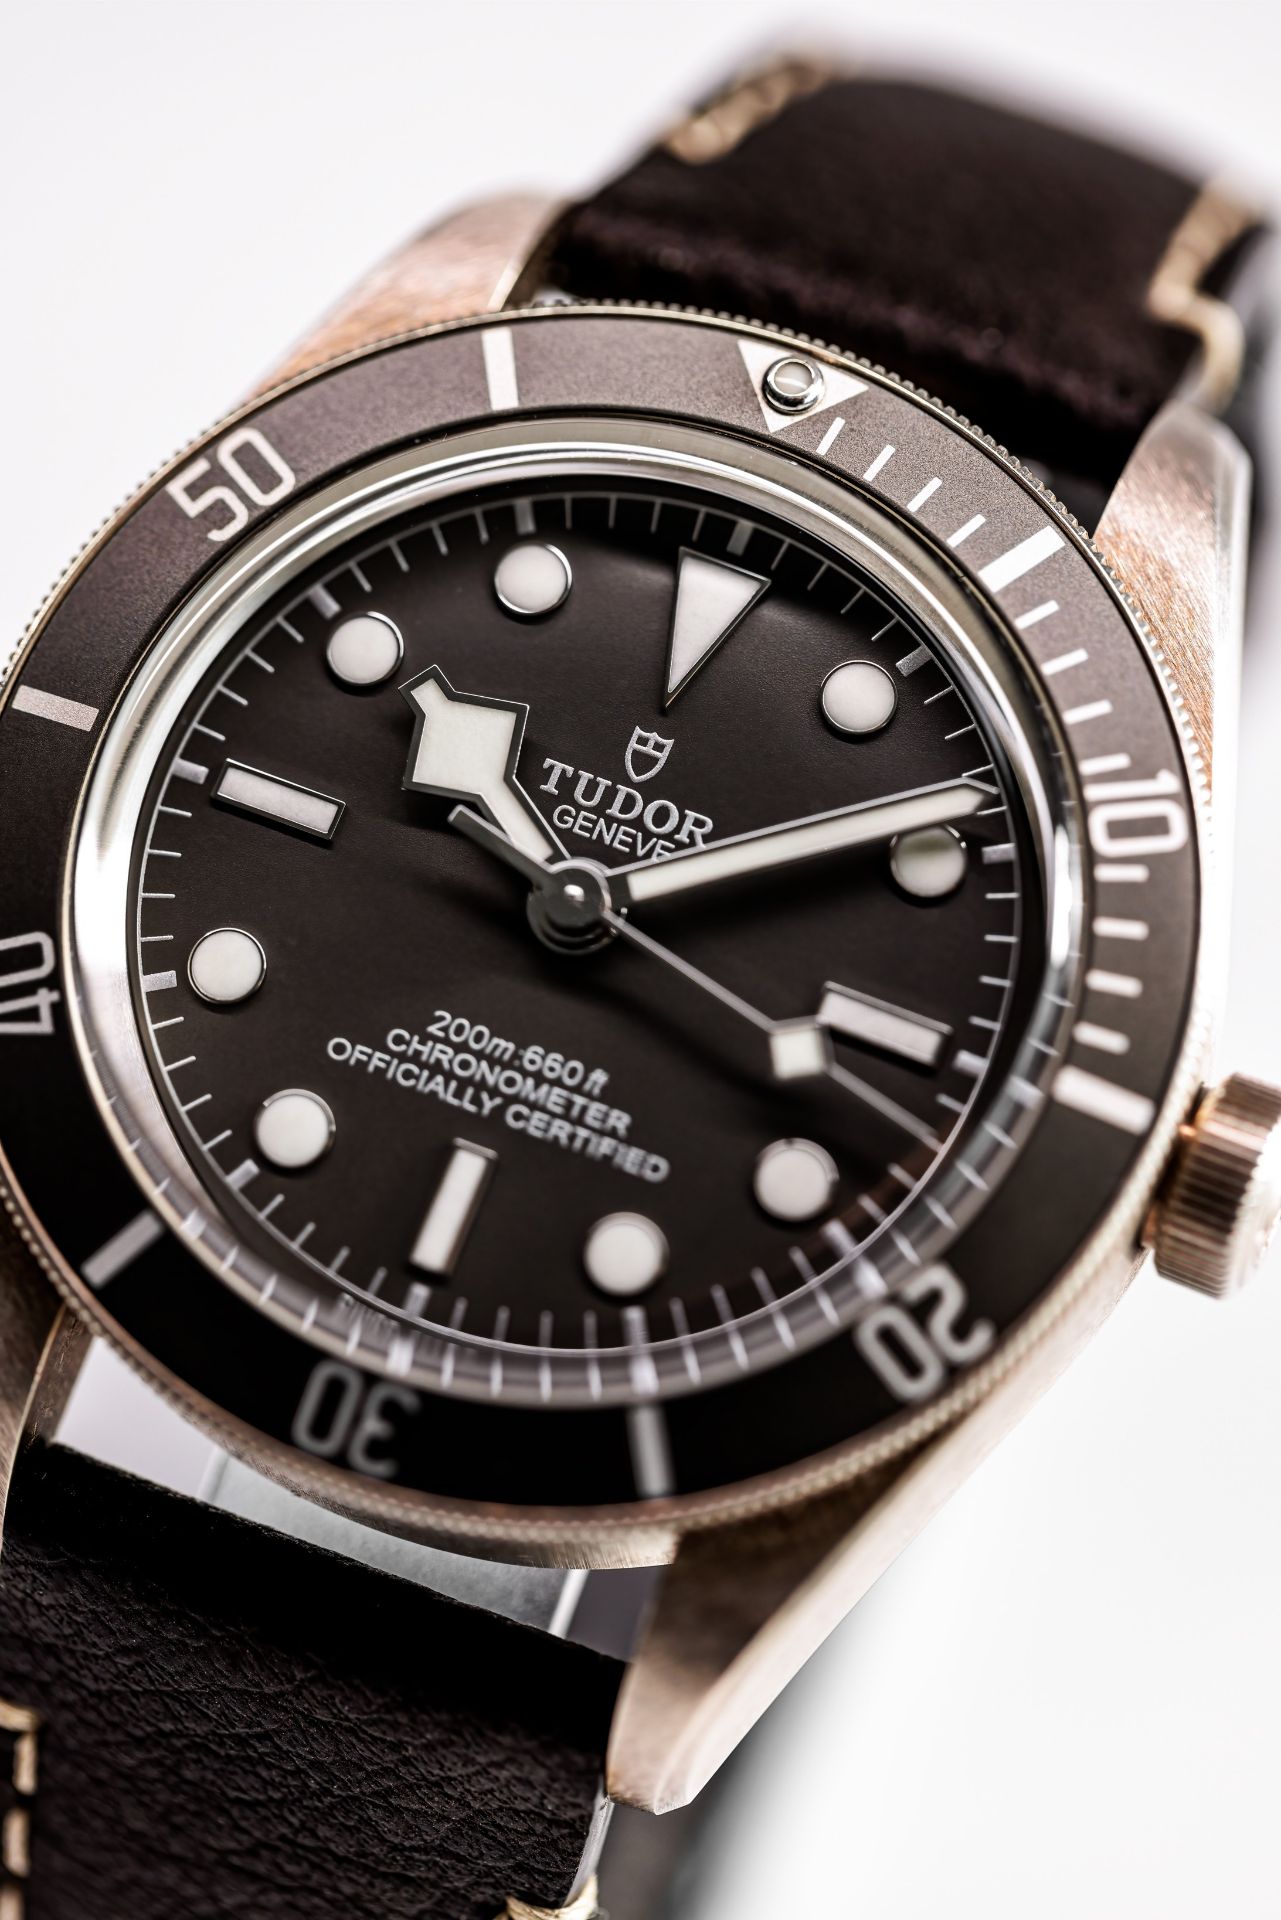 No Reserve - Tudor Black Bay Fifty-Eight 79010S - Men's watch - 2022. - Image 7 of 7